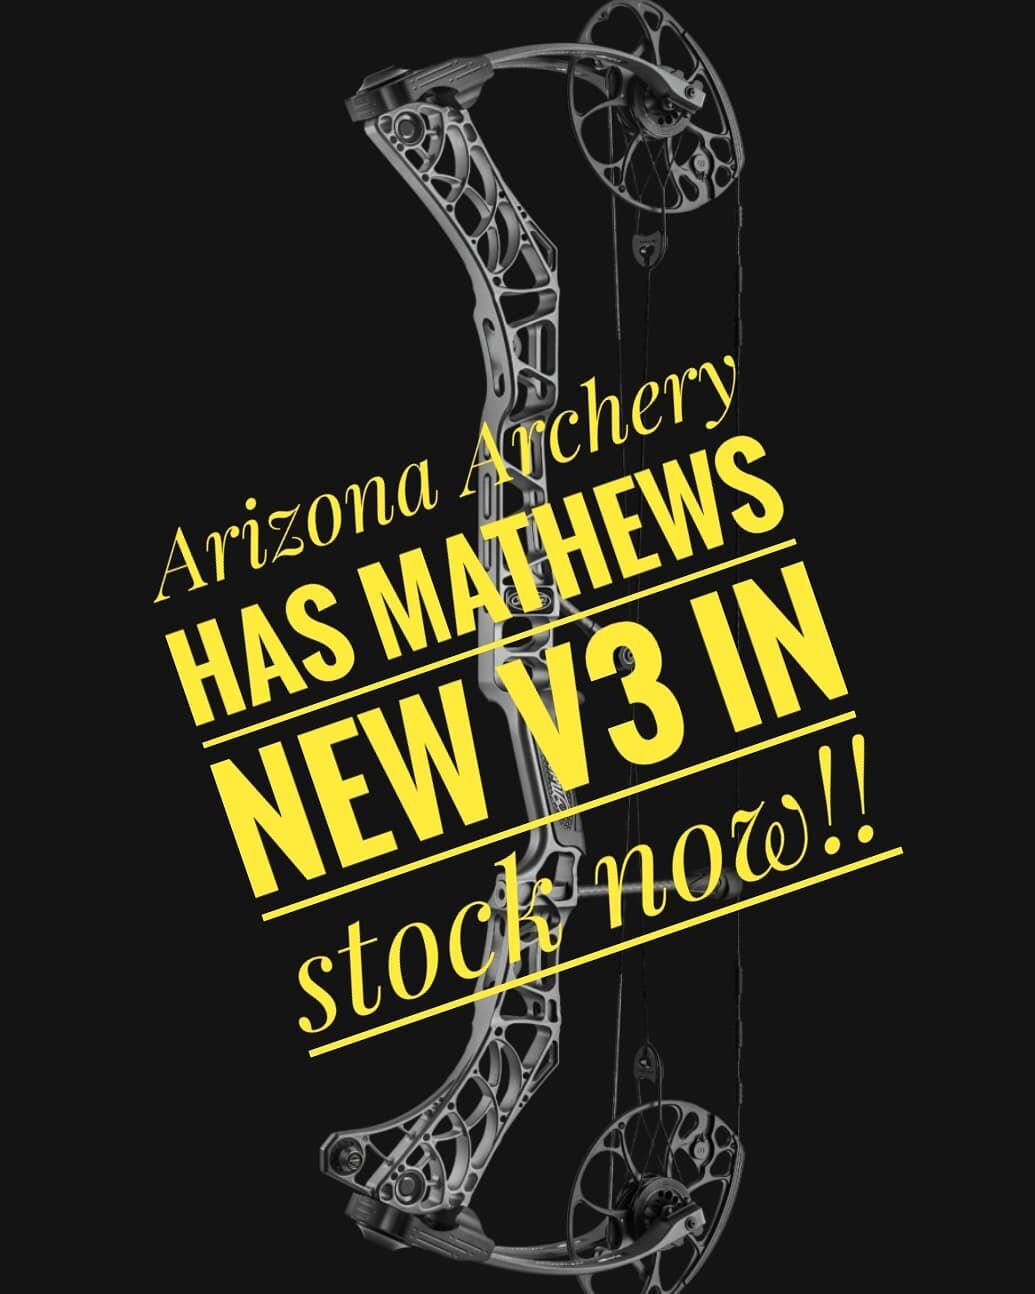 Our Mathews V3's have arrived!! Black Friday all accessories are 10% off!! We open at 11am on Friday!!